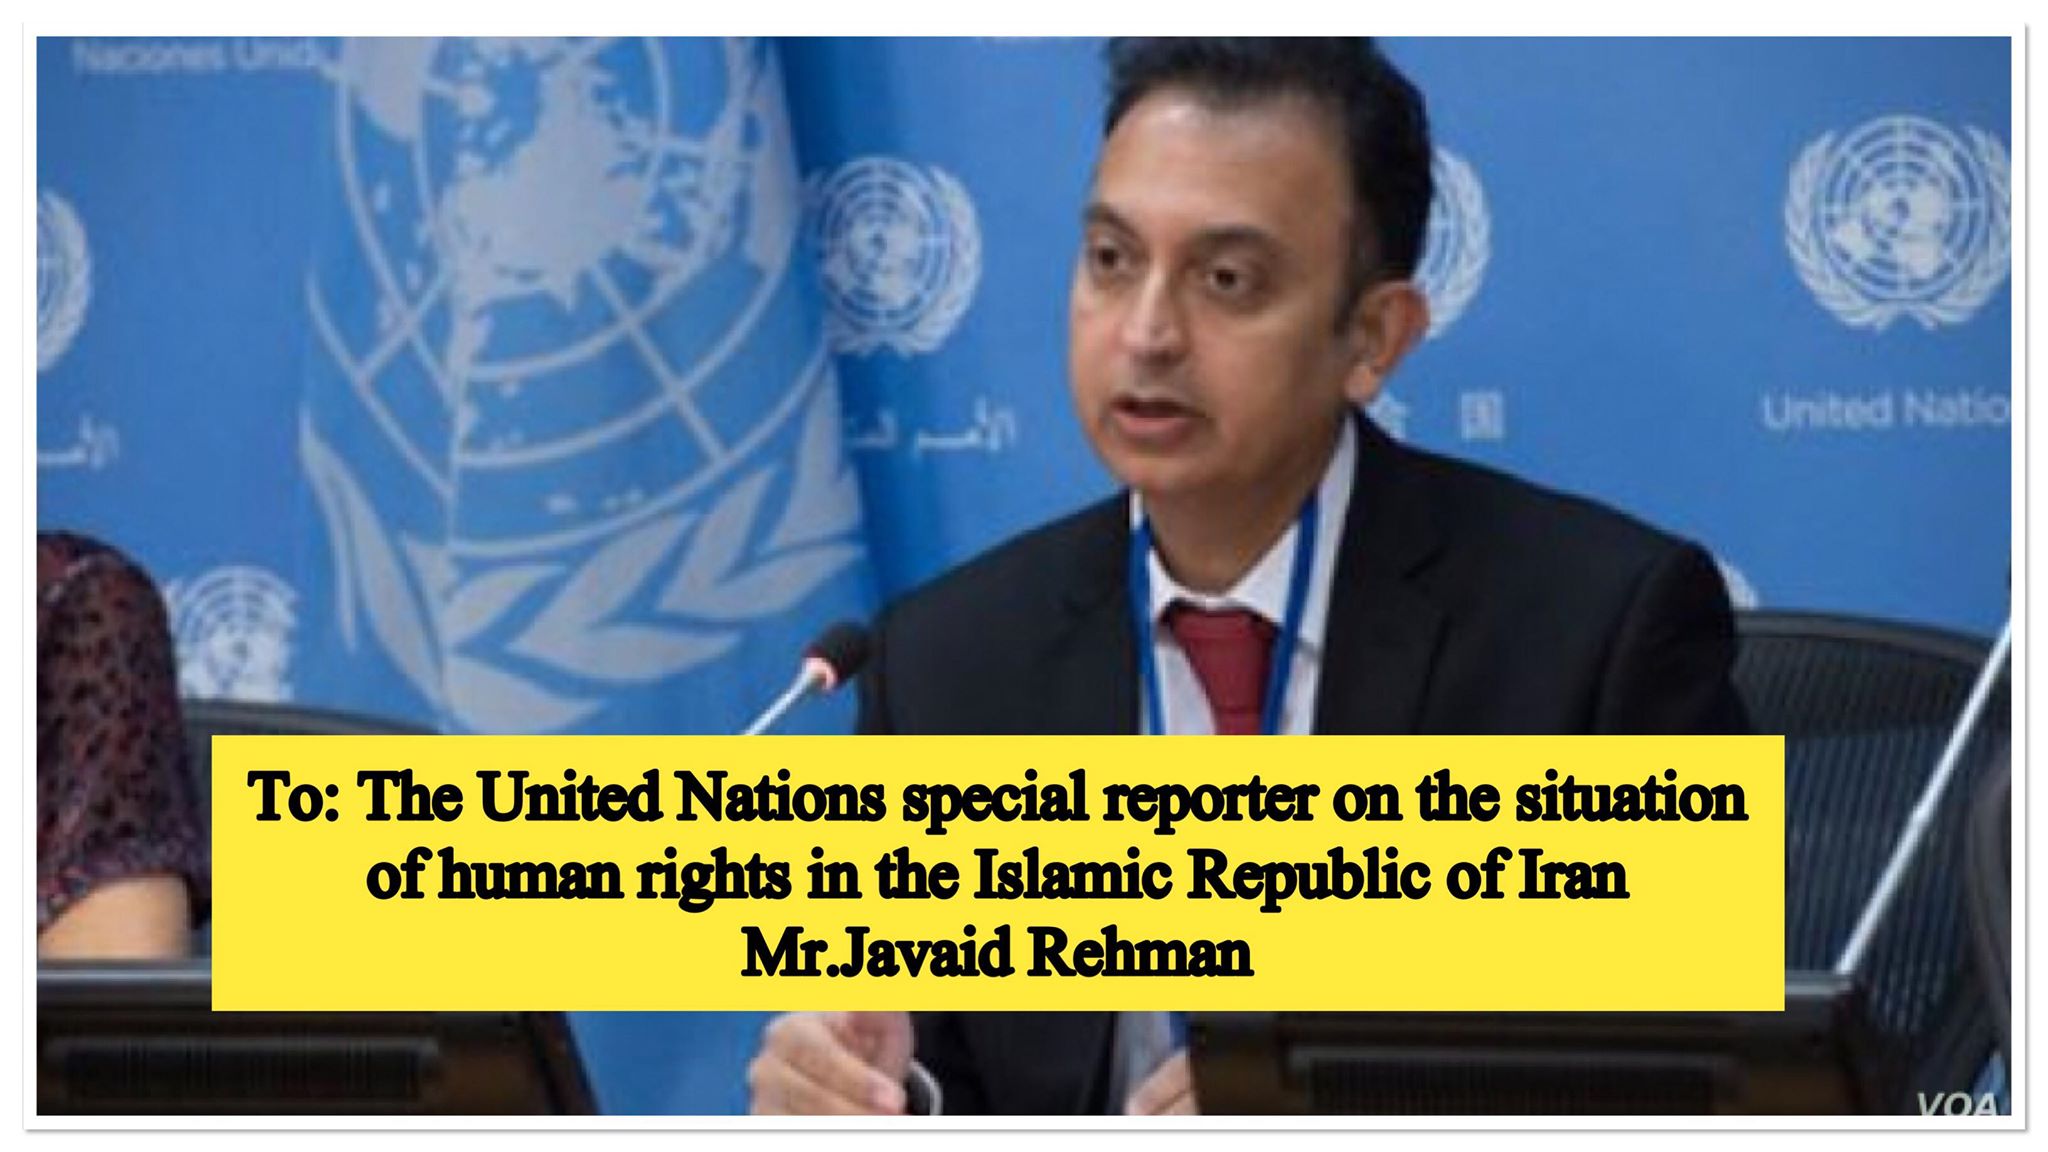 To: The United Nations special reporter on the situation of human rights in the Islamic Republic of Iran Mr. Javaid Rehman